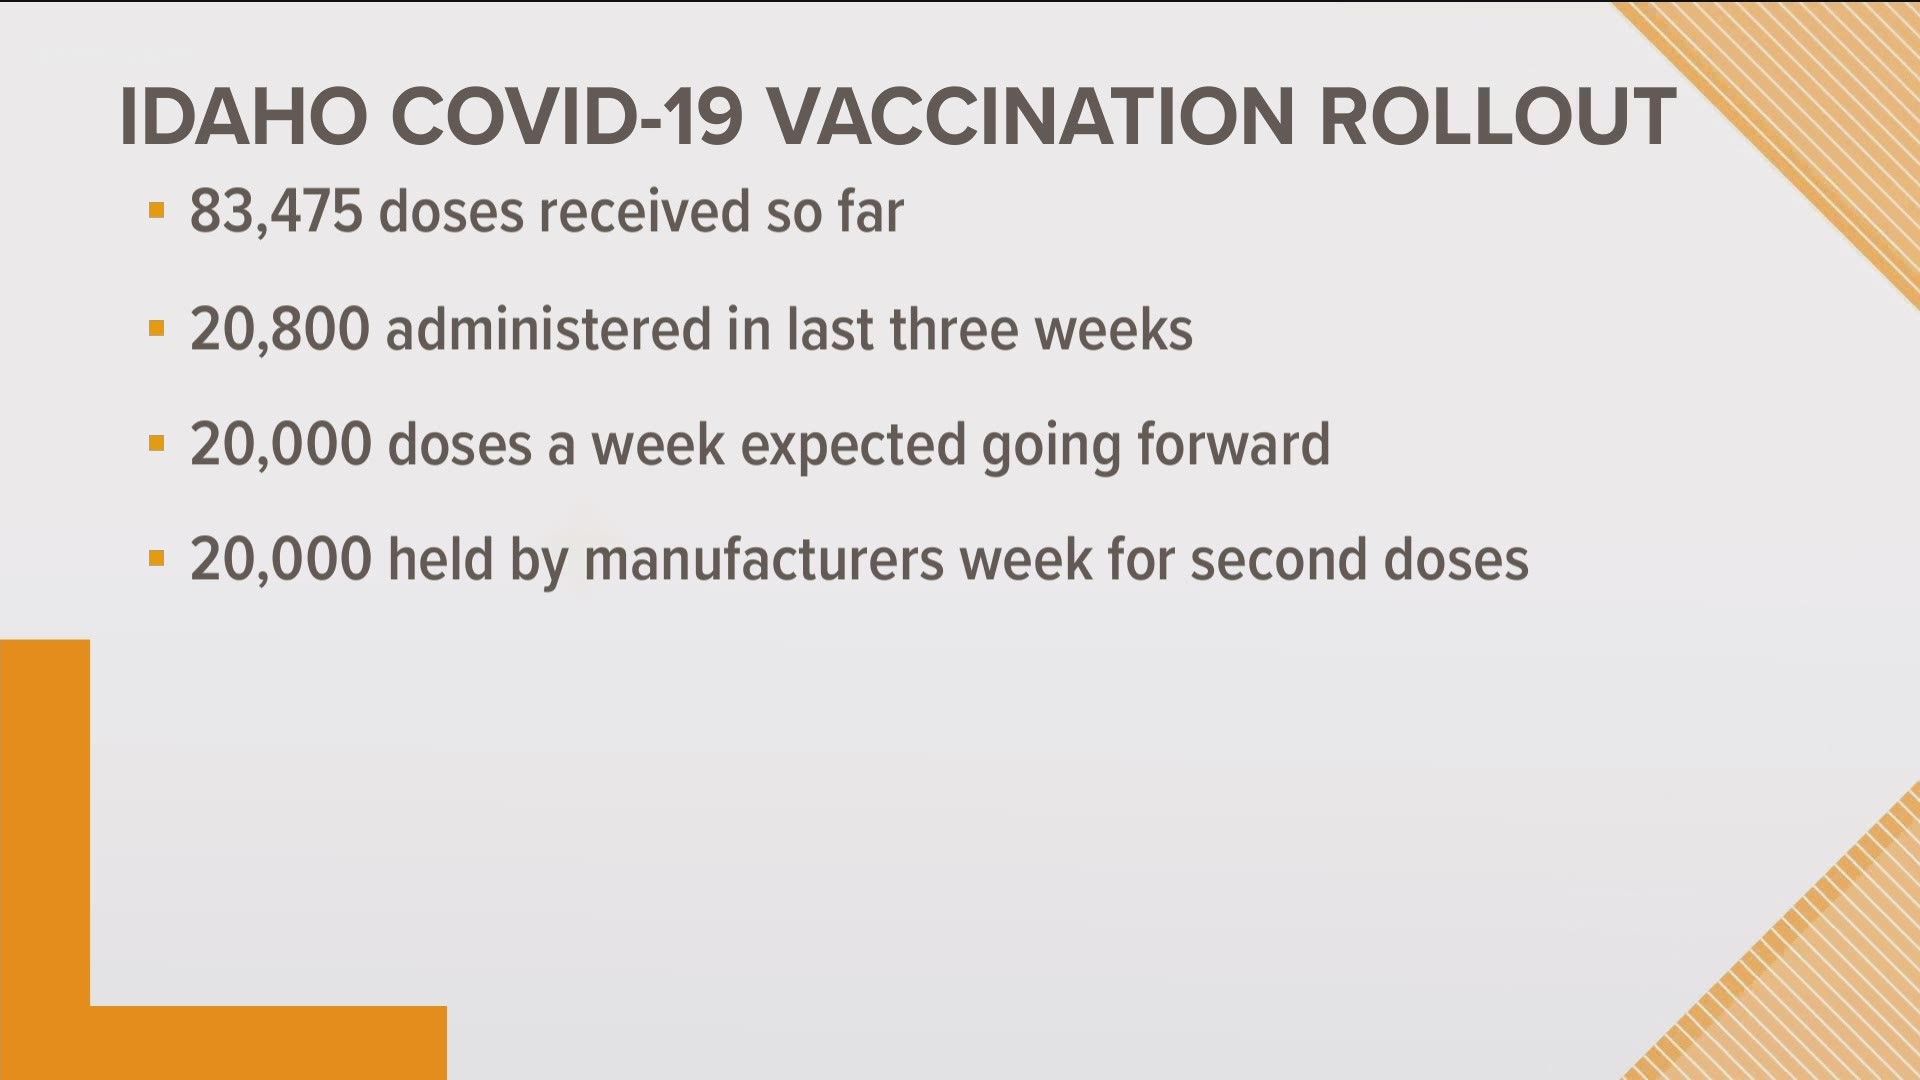 Idaho public health officials discussed the state's vaccination rollout in the coming months.